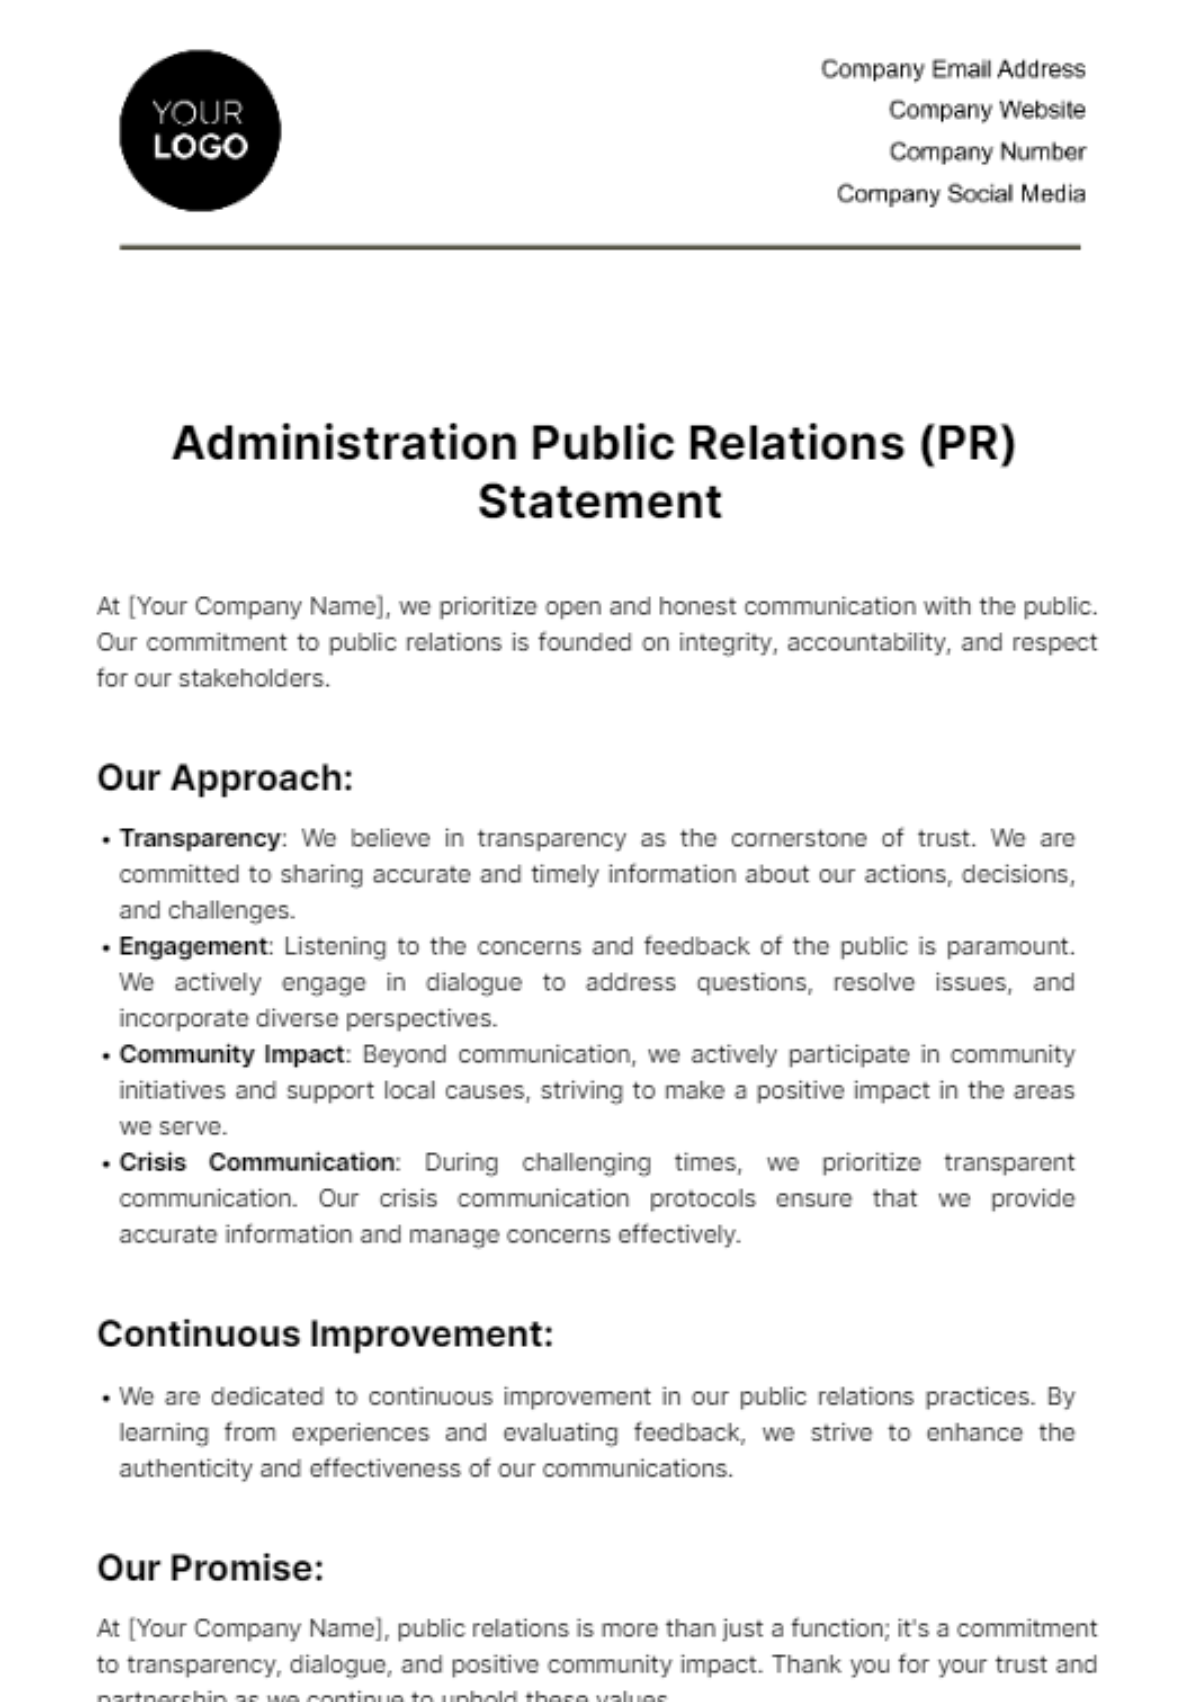 Free Administration Public Relations (PR) Statement Template